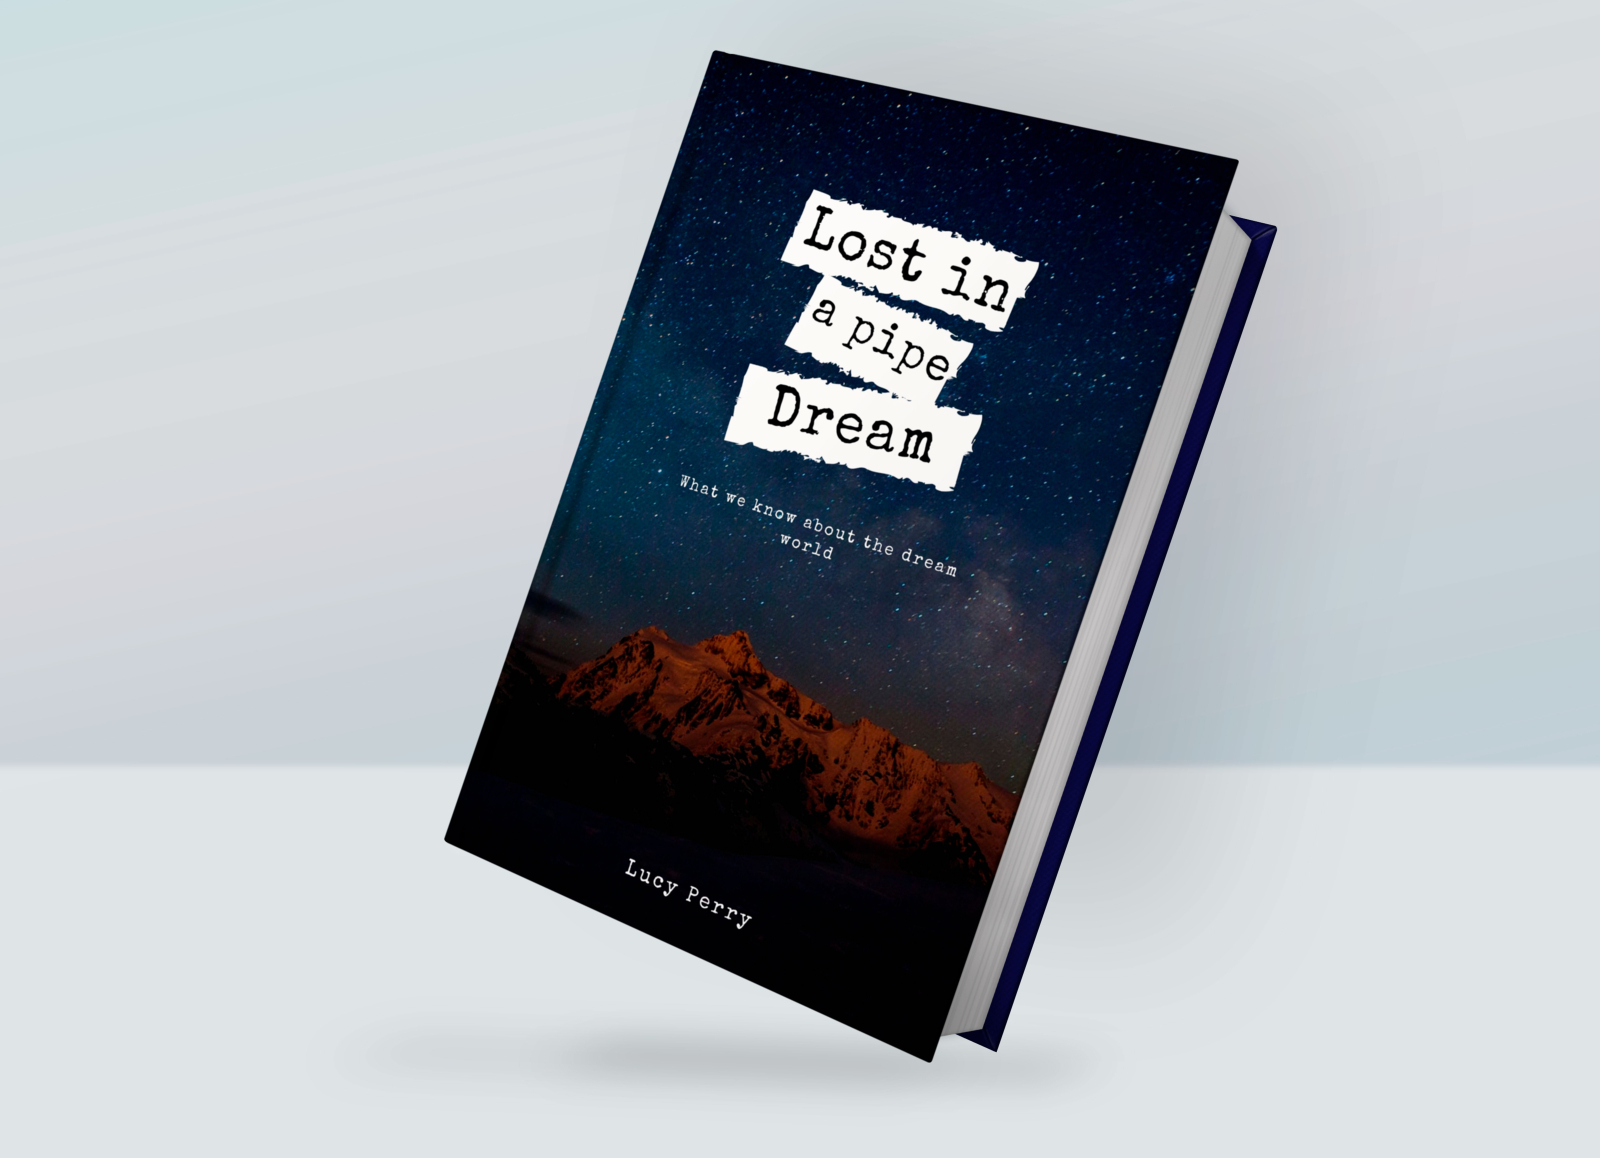 Dream Book Cover Design By Mm Graphic Design On Dribbble